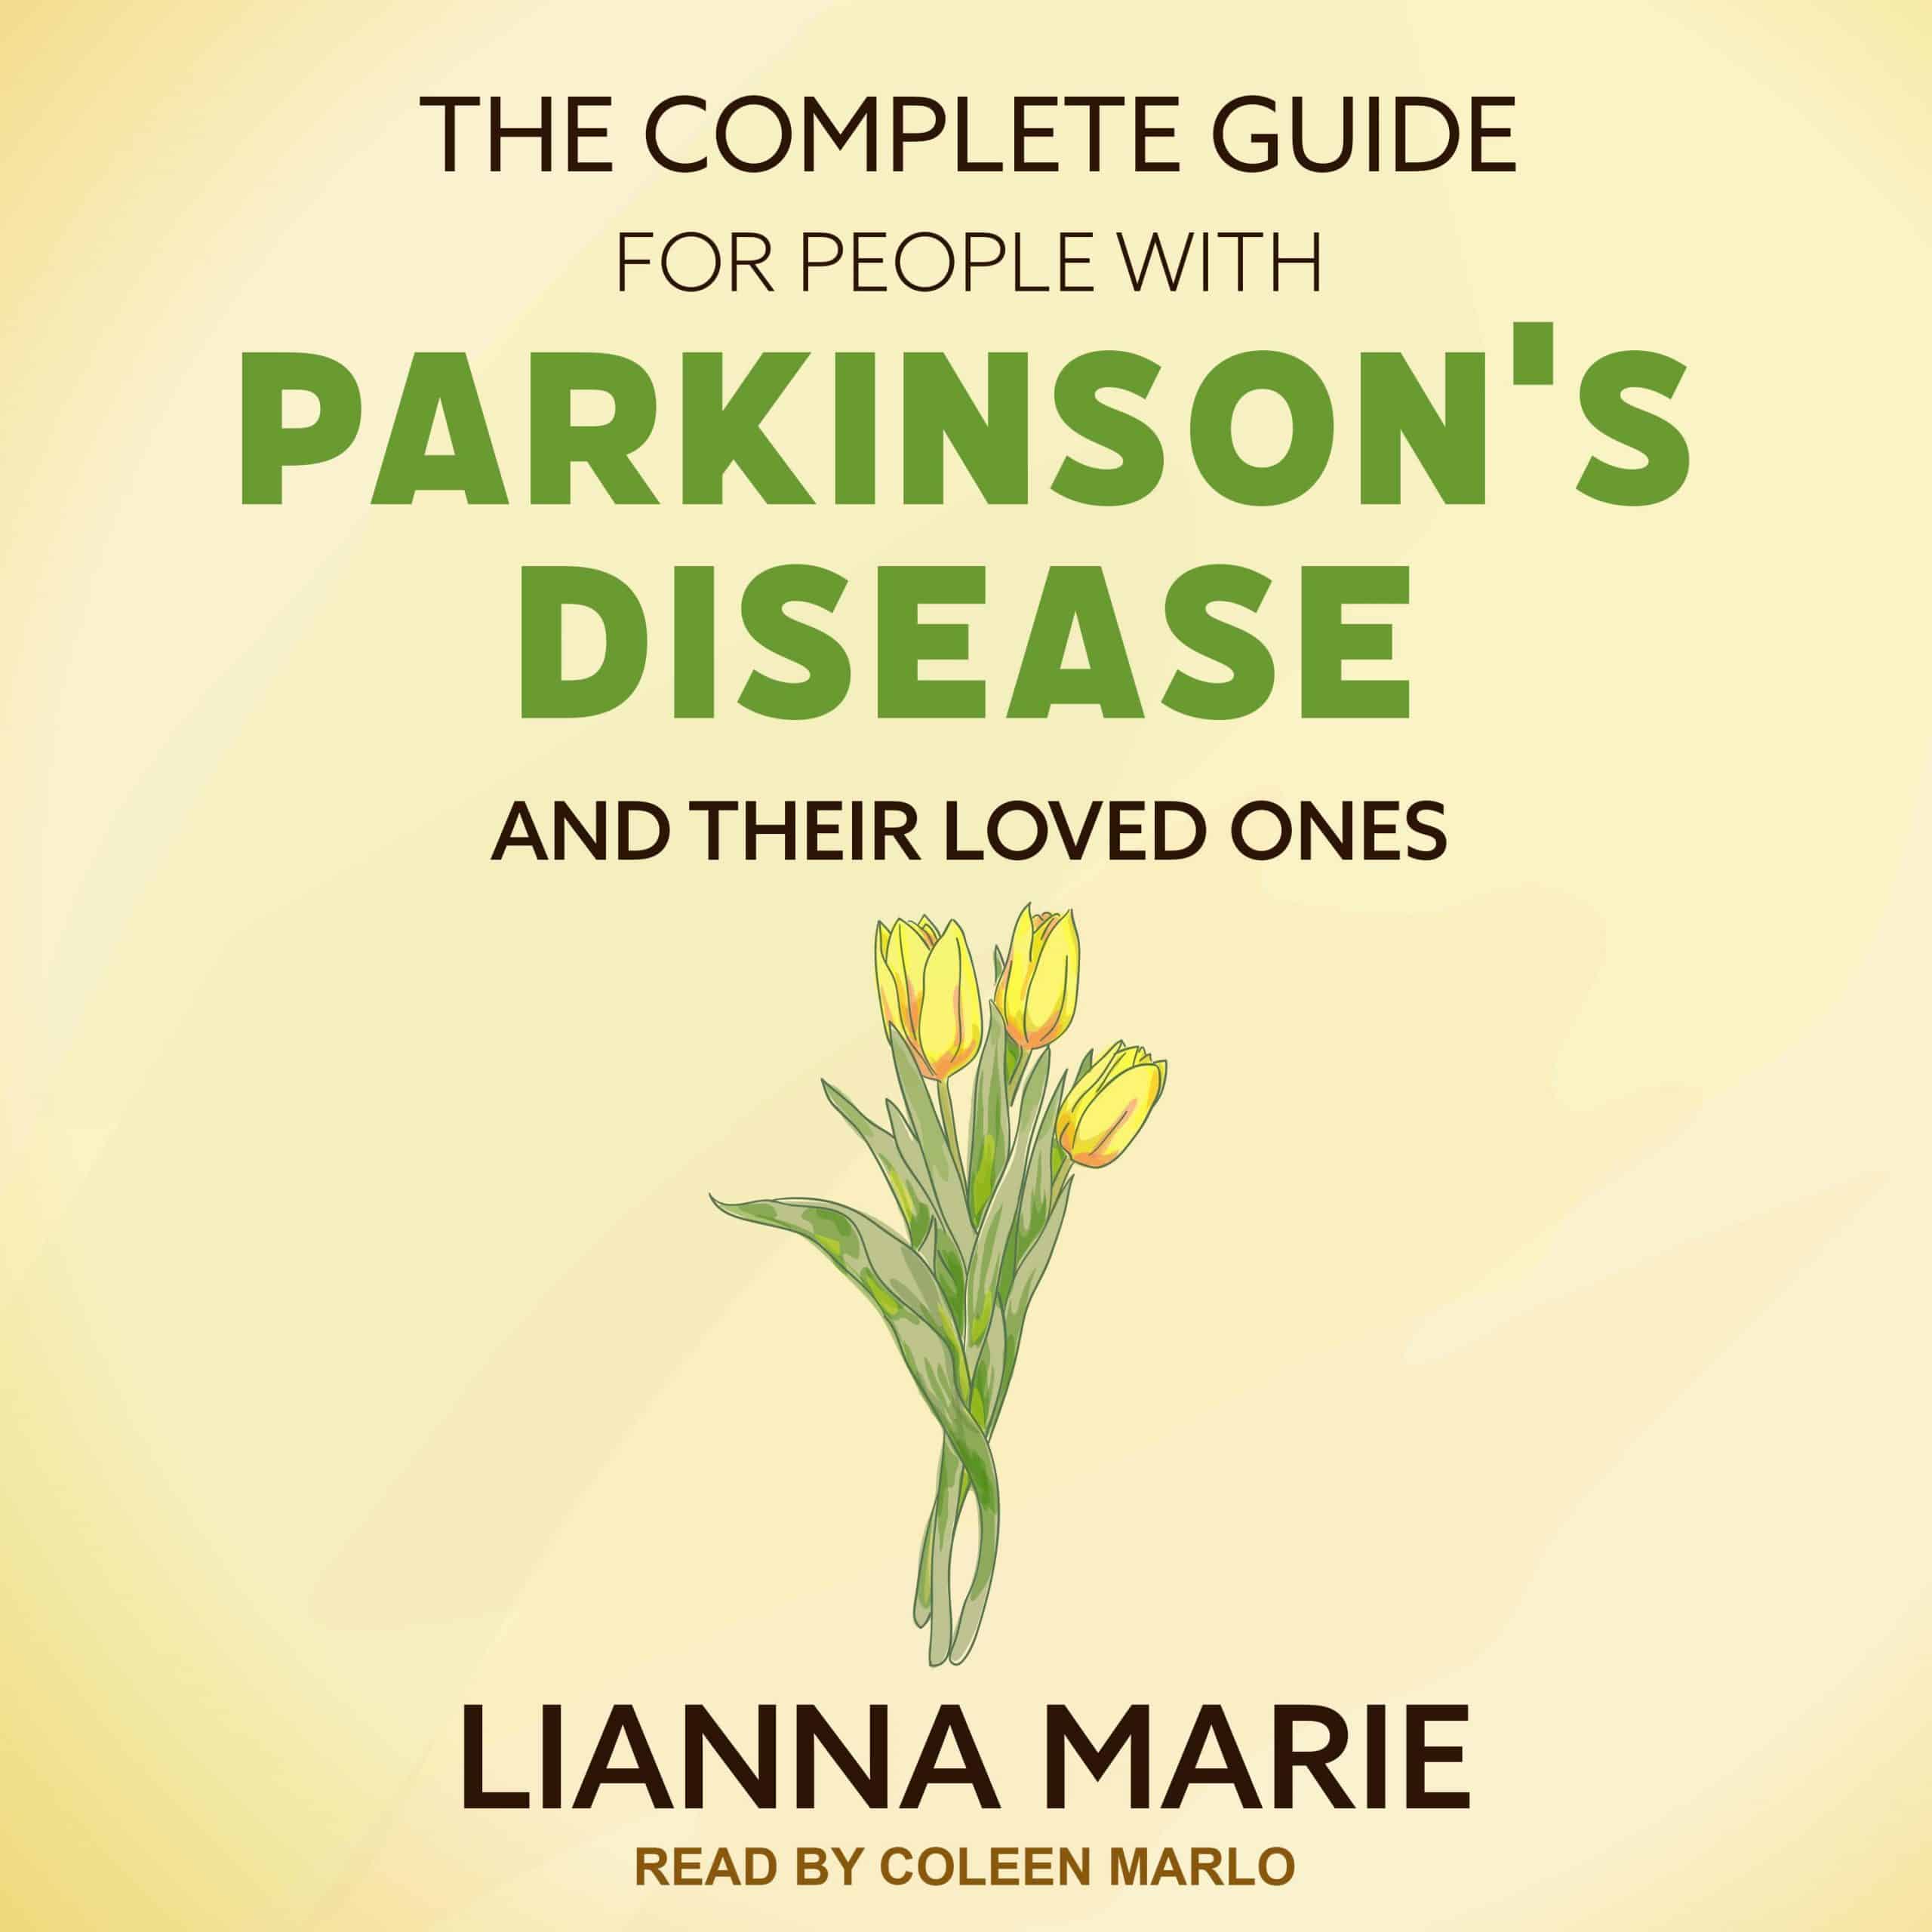 The Complete Guide for People With Parkinson